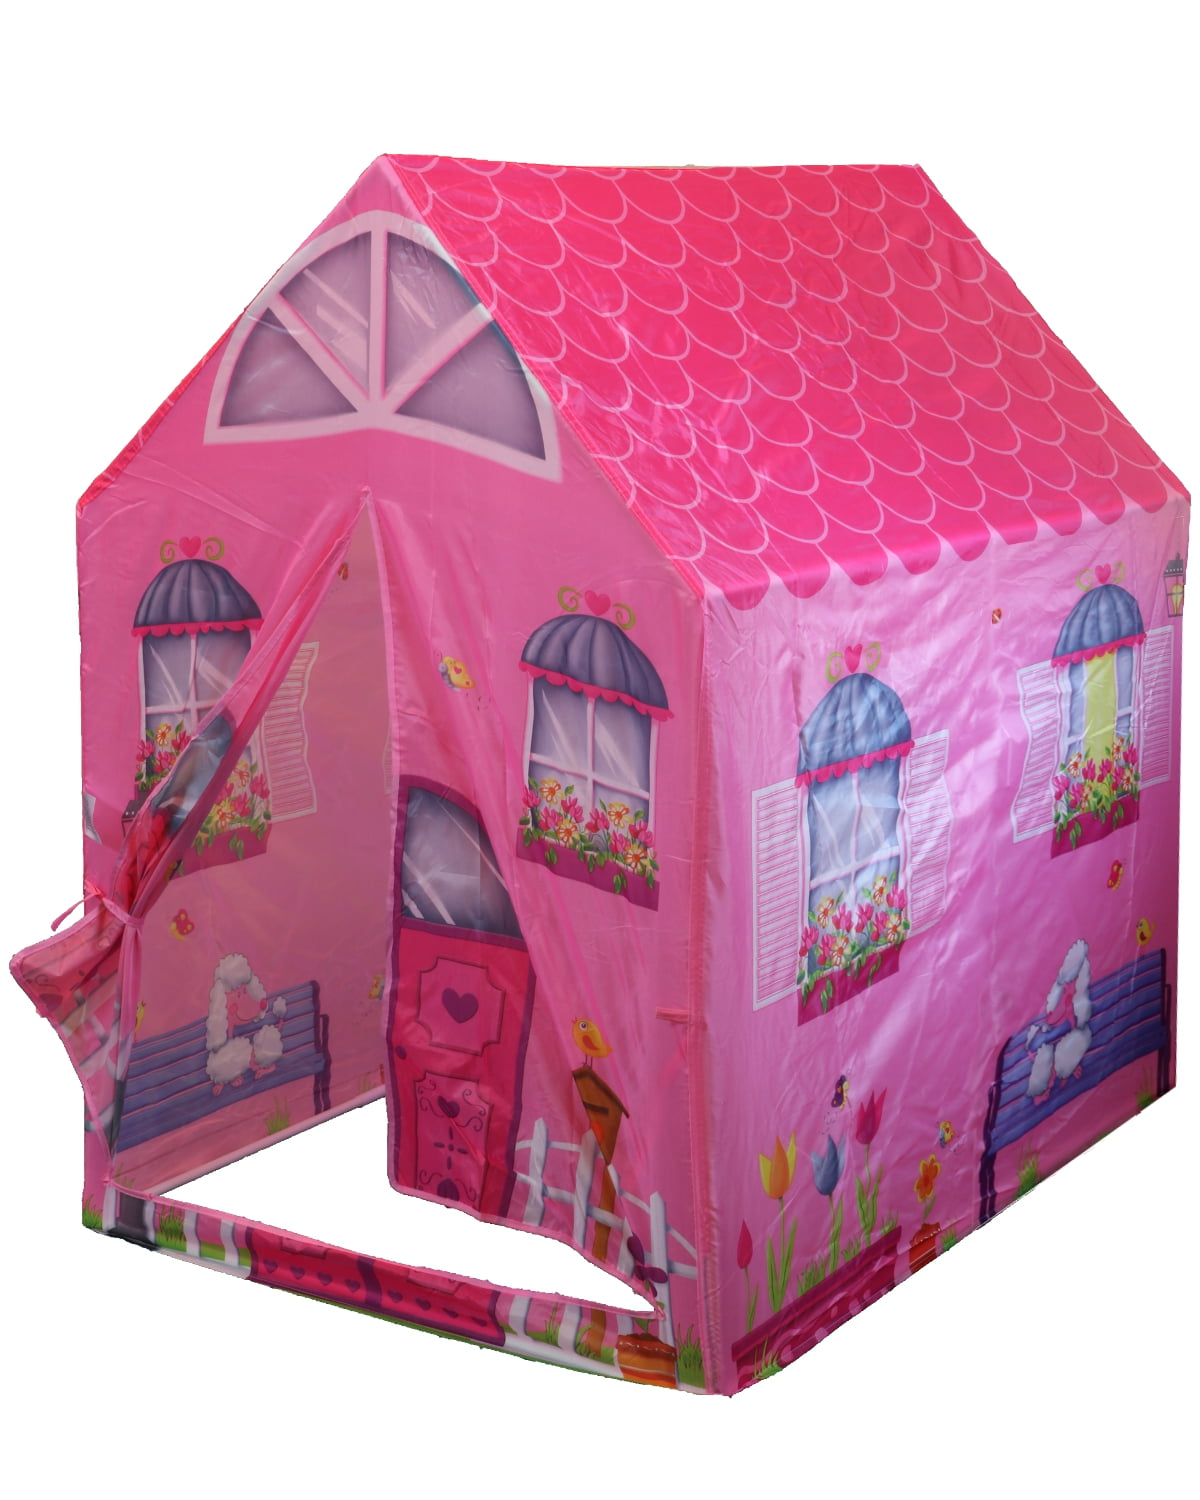 HABA Princess Rosalina Play Tent 2day Delivery for sale online 